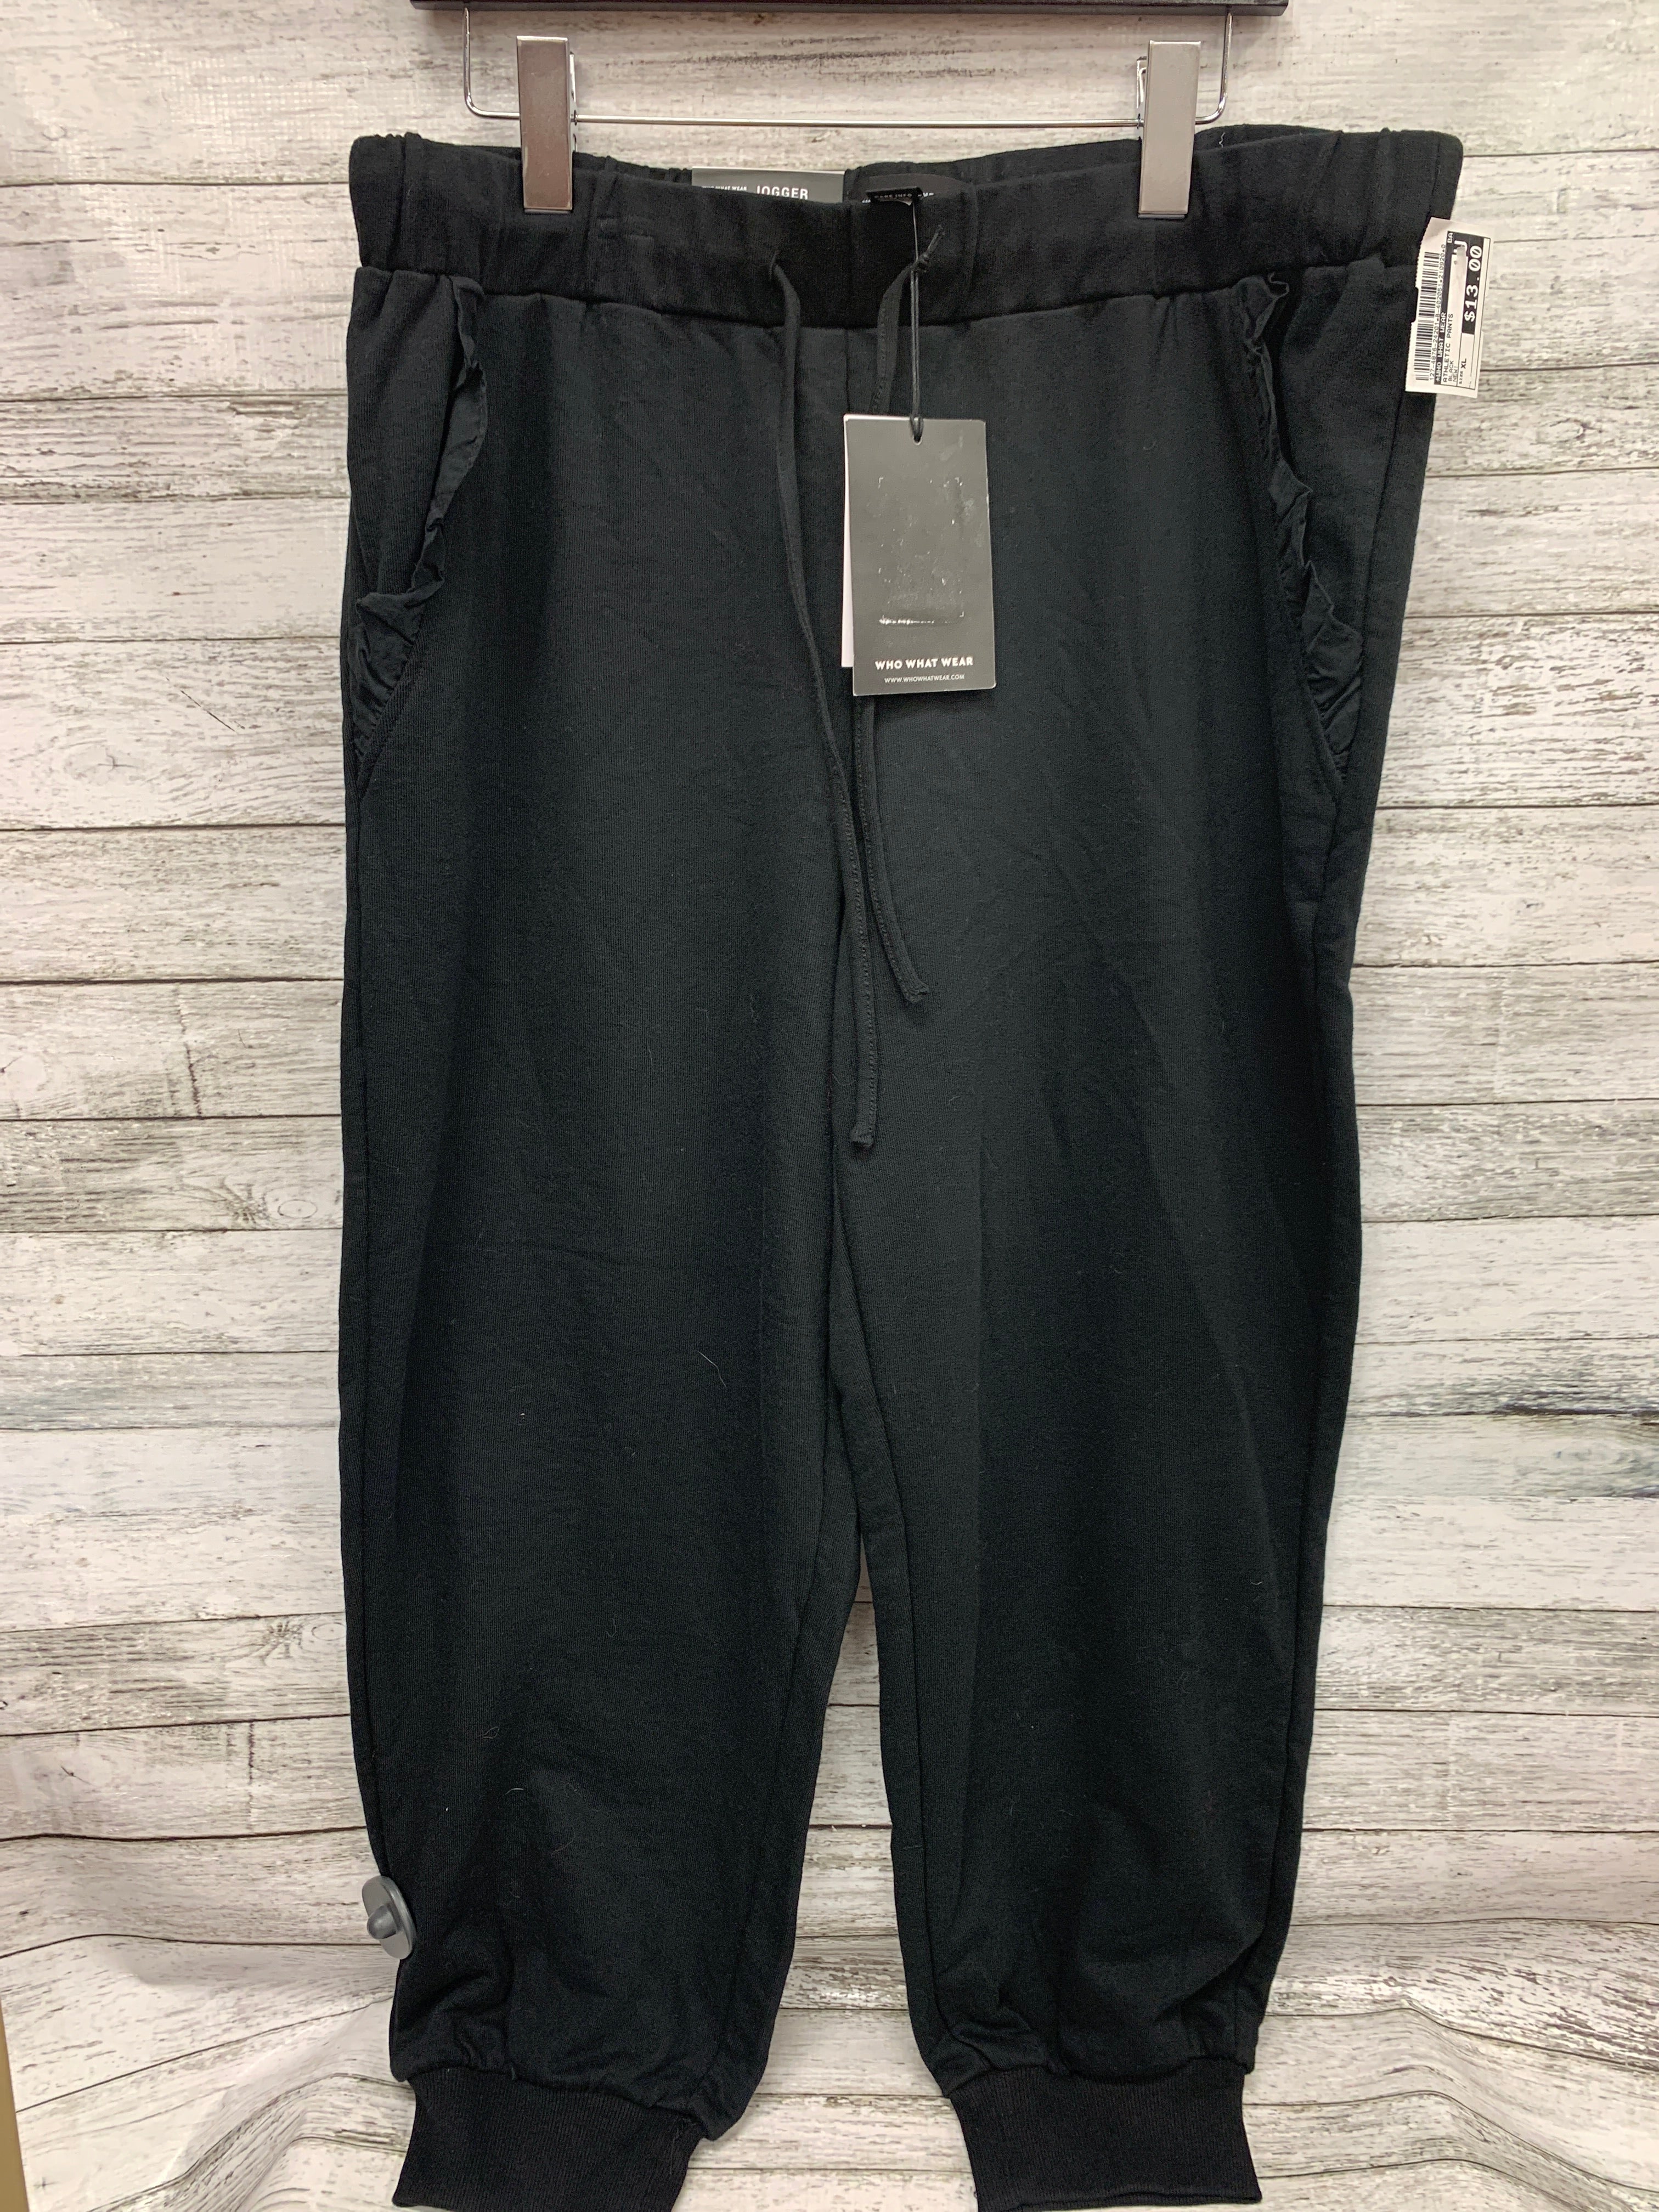 Athletic Pants By Athletic Works Size: Xl